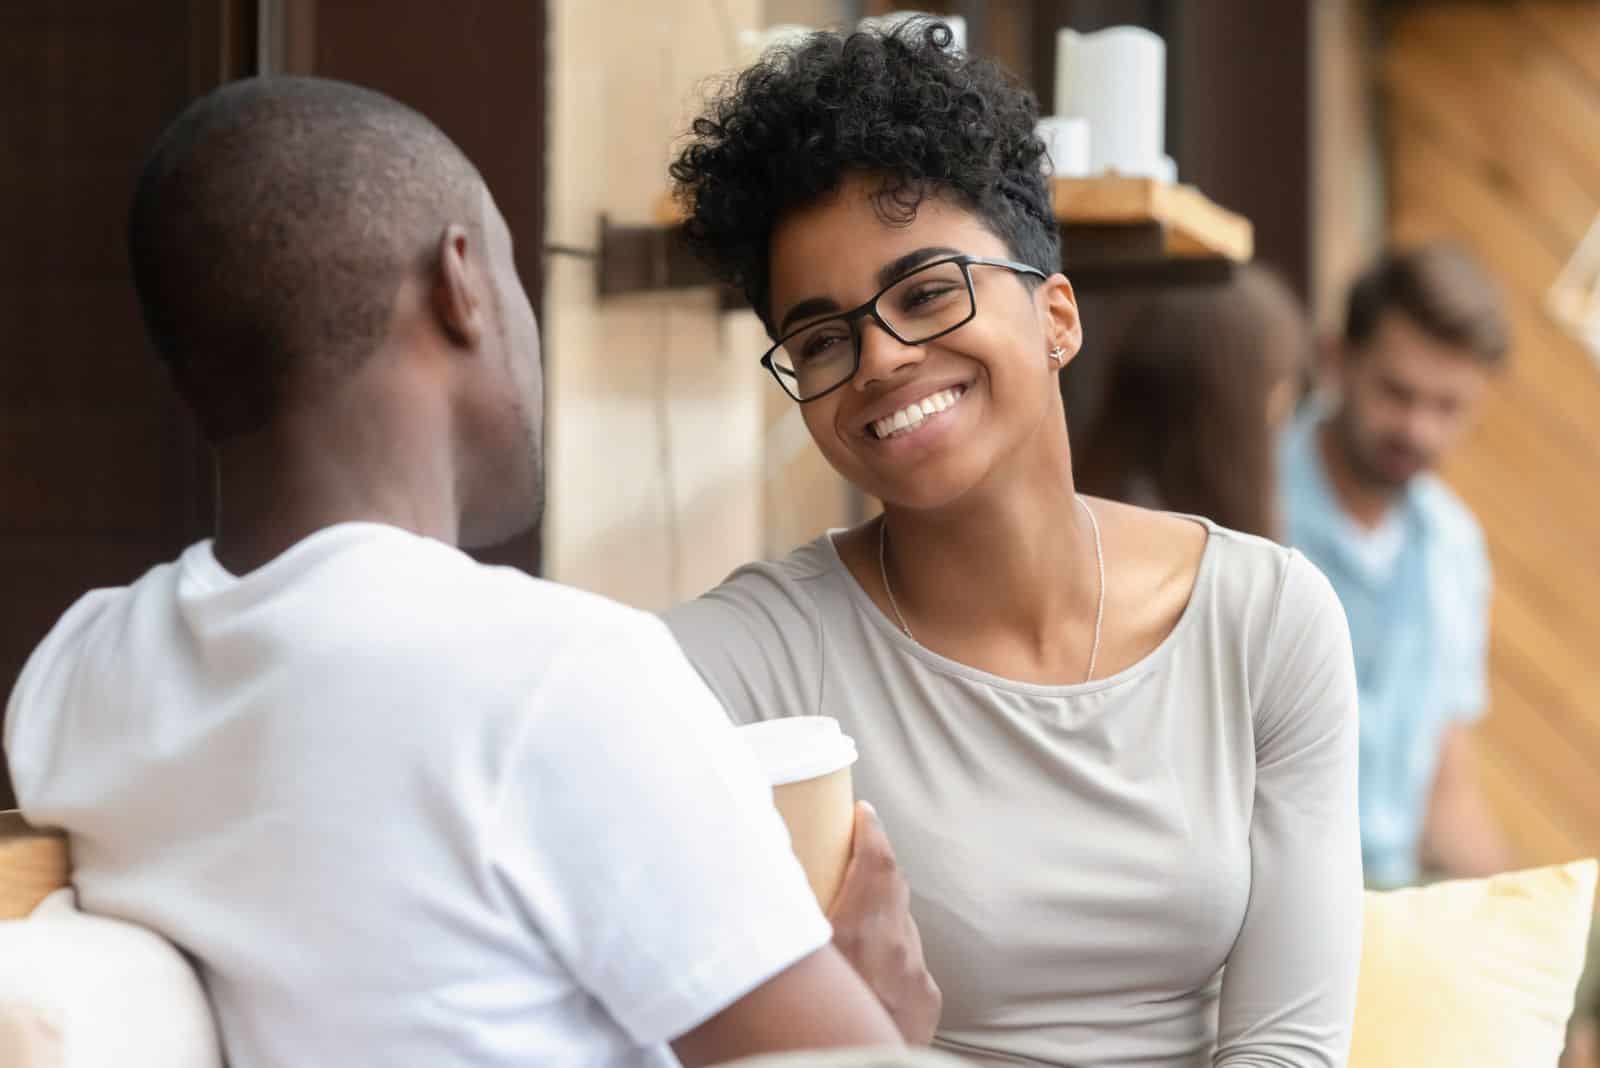 smiling woman with glasses talking to a man